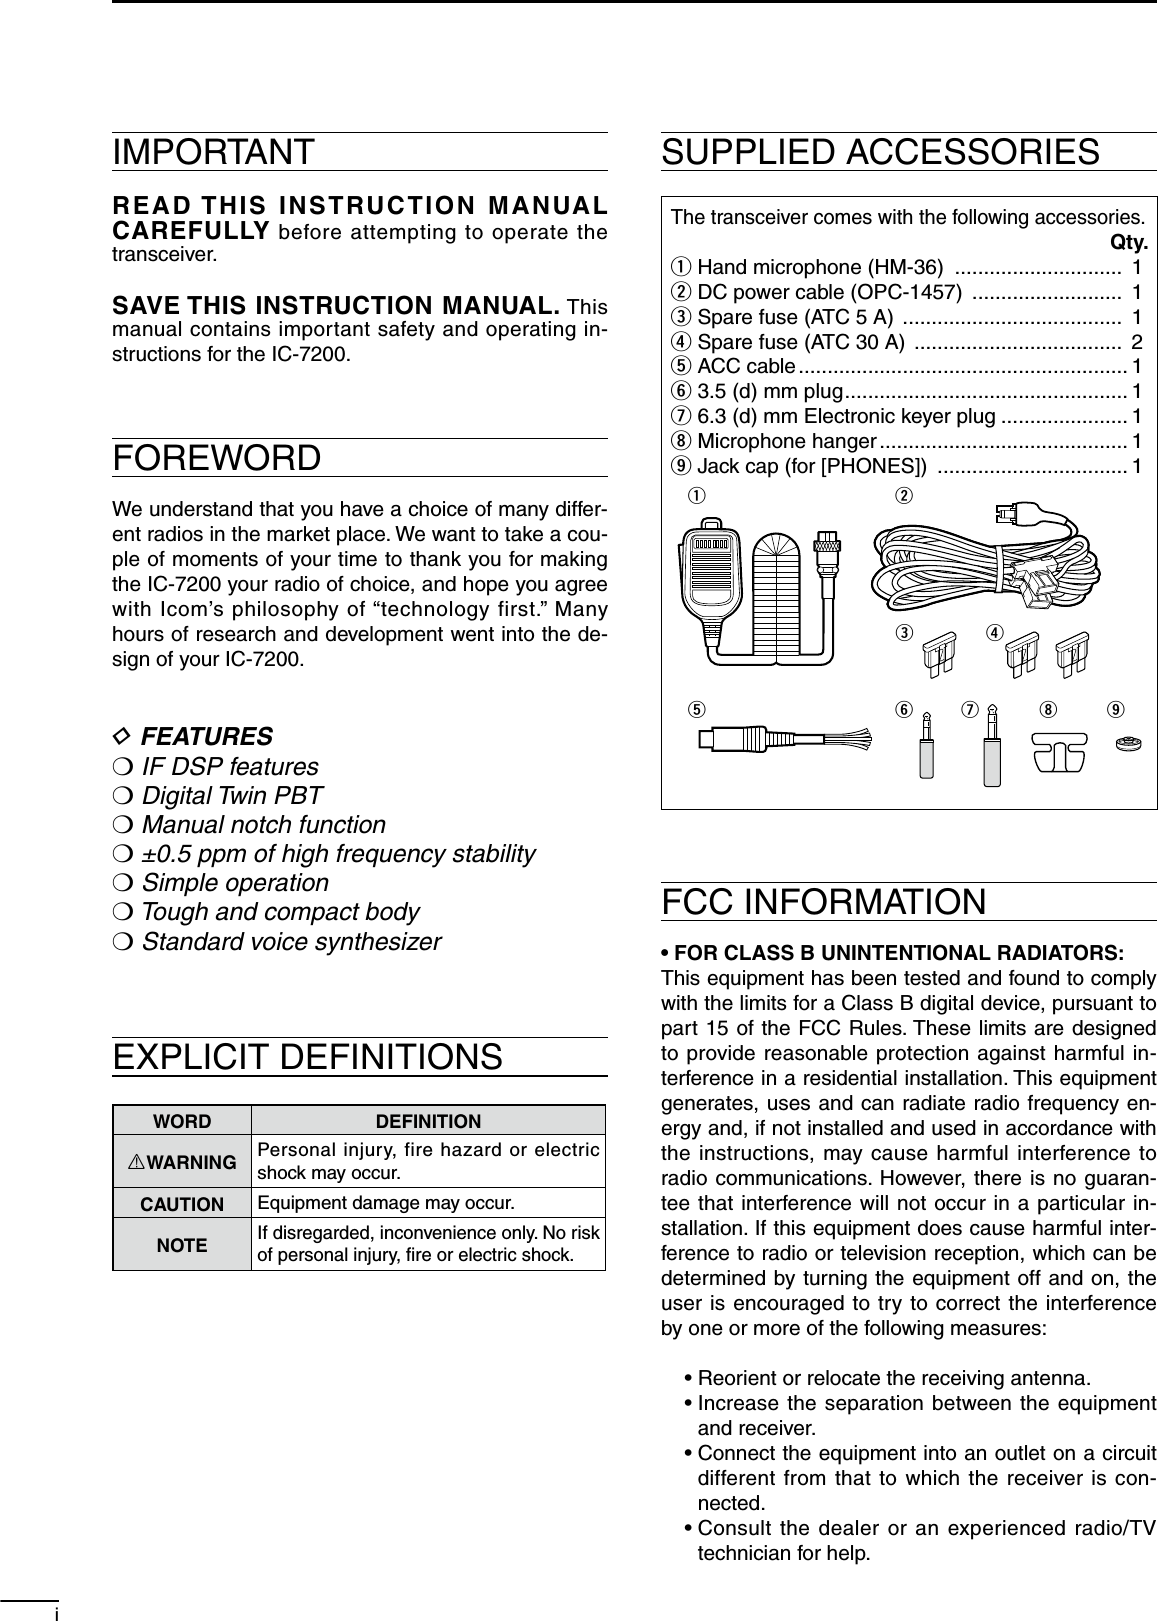 IMPORTANTREAD THIS INSTRUCTION MANUAL CAREFULLY before attempting to operate the transceiver.SAVE THIS INSTRUCTION MANUAL. This manual contains important safety and operating in-structions for the IC-7200.FOREWORDWe understand that you have a choice of many differ-ent radios in the market place. We want to take a cou-ple of moments of your time to thank you for making the IC-7200 your radio of choice, and hope you agree with Icom’s philosophy of “technology first.” Many hours of research and development went into the de-sign of your IC-7200.D FEATURESM IF DSP featuresM Digital Twin PBTM Manual notch functionM ±0.5 ppm of high frequency stabilityM Simple operationM Tough and compact bodyM Standard voice synthesizerEXPLICIT DEFINITIONSWORD DEFINITIONRWARNING Personal injury, fire hazard or electric shock may occur.CAUTION Equipment damage may occur.NOTEIf disregarded, inconvenience only. No risk of personal injury, ﬁre or electric shock.SUPPLIED ACCESSORIESThe transceiver comes with the following accessories.Qty.q Hand microphone (HM-36)  .............................  1w DC power cable (OPC-1457)  ..........................  1e Spare fuse (ATC 5 A)  ......................................  1r Spare fuse (ATC 30 A)  ....................................  2t ACC cable ......................................................... 1y 3.5 (d) mm plug ................................................. 1u 6.3 (d) mm Electronic keyer plug ...................... 1i Microphone hanger ........................................... 1o Jack cap (for [PHONES])  ................................. 1qetwyurioFCC INFORMATION• FOR CLASS B UNINTENTIONAL RADIATORS:This equipment has been tested and found to comply with the limits for a Class B digital device, pursuant to part 15 of the FCC Rules. These limits are designed to provide reasonable protection against harmful in-terference in a residential installation. This equipment generates, uses and can radiate radio frequency en-ergy and, if not installed and used in accordance with the instructions, may cause harmful interference to radio communications. However, there is no guaran-tee that interference will not occur in a particular in-stallation. If this equipment does cause harmful inter-ference to radio or television reception, which can be determined by turning the equipment off and on, the user is encouraged to try to correct the interference by one or more of the following measures:  • Reorient or relocate the receiving antenna. •  Increase the separation between the equipment and receiver. •  Connect the equipment into an outlet on a circuit different from that to which the receiver is con-nected. •  Consult the dealer or an experienced radio/TV technician for help.i